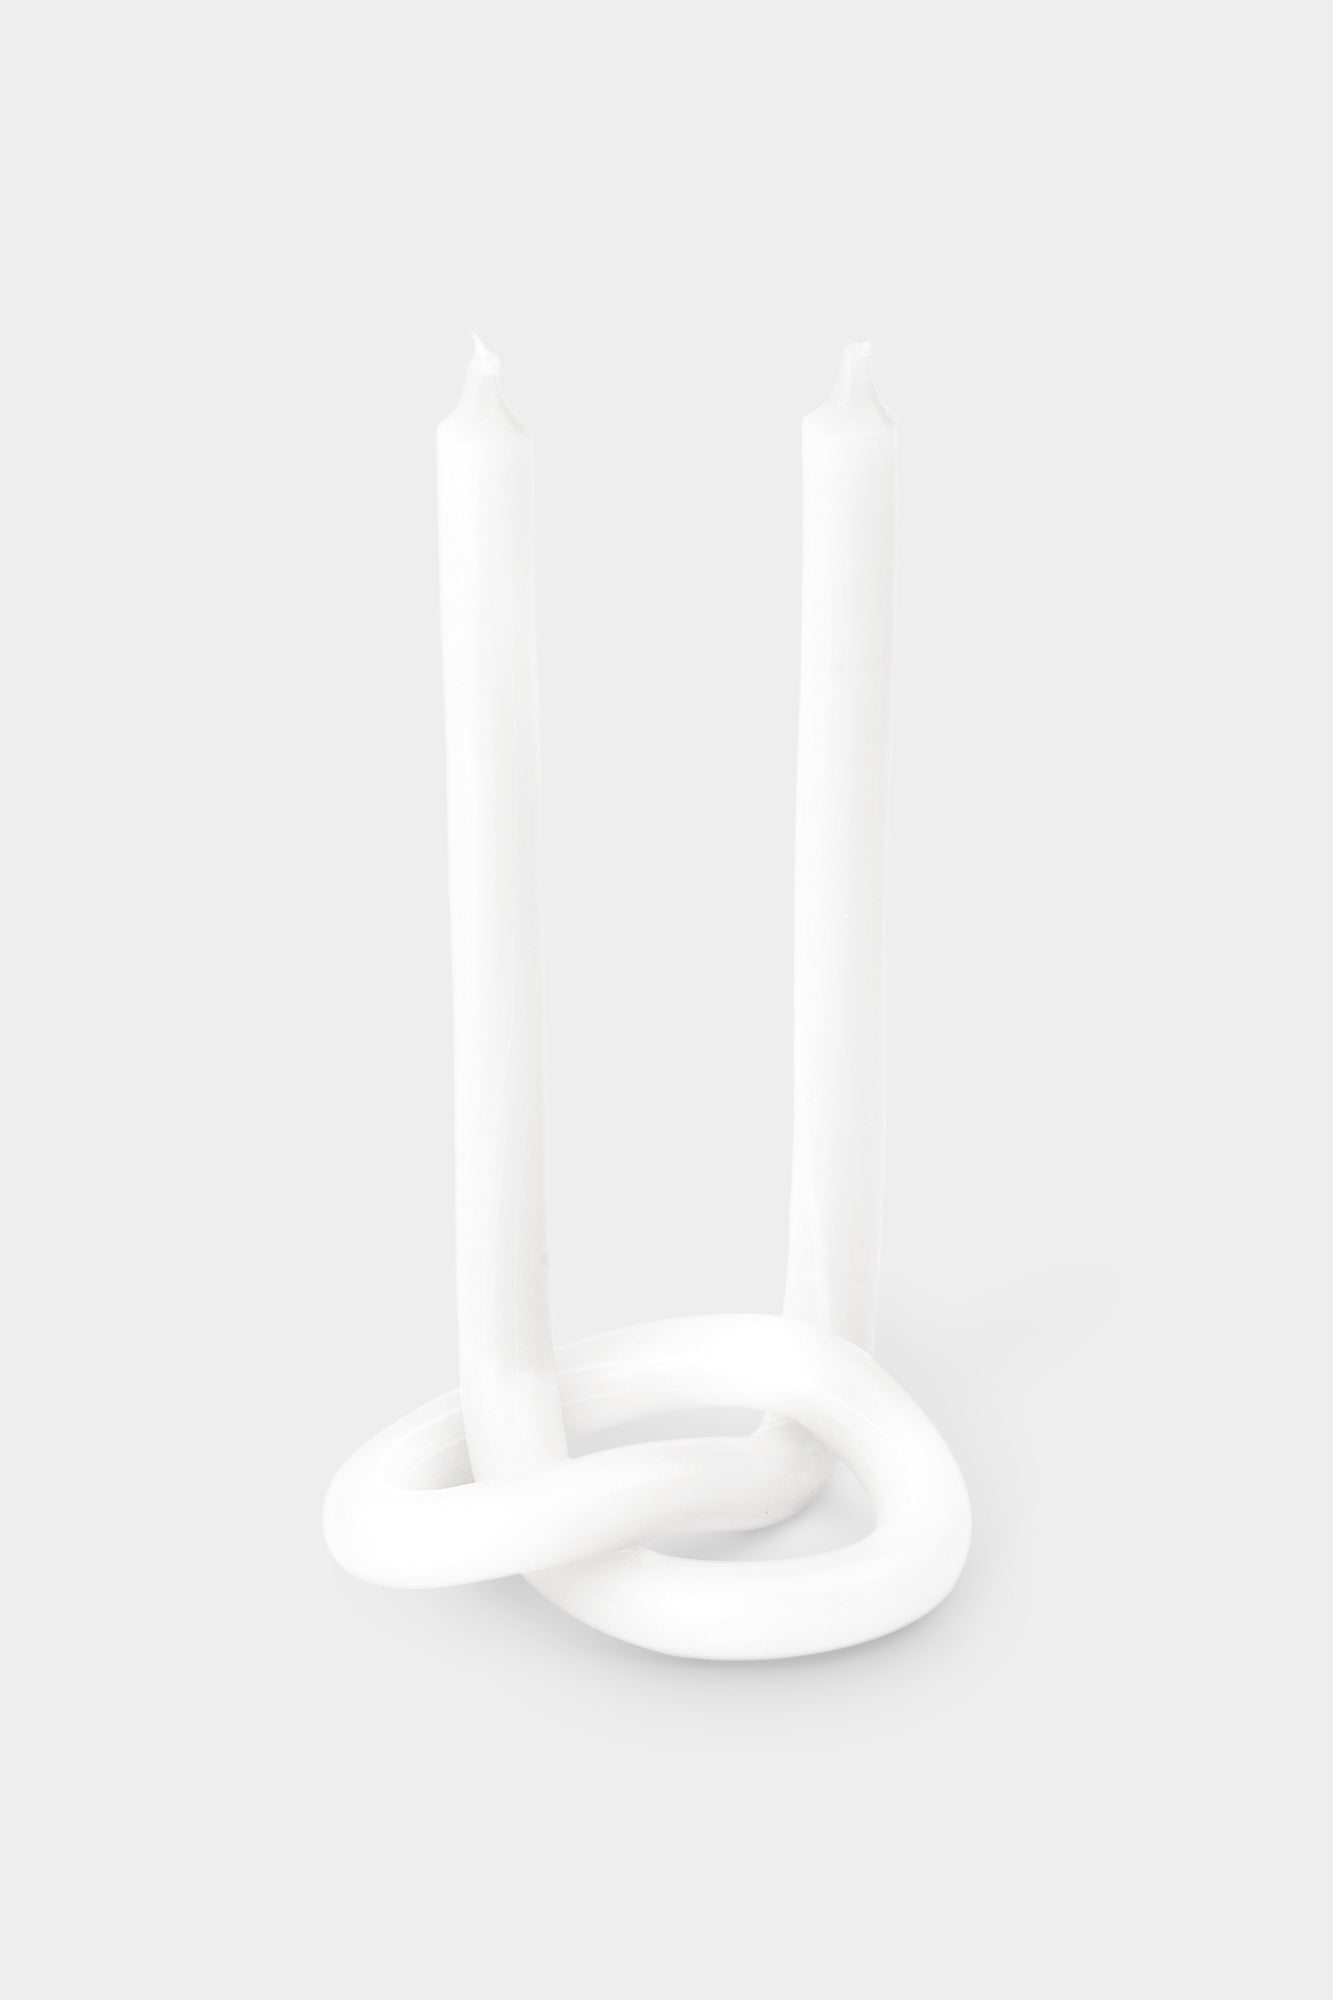 Knot Candle - White